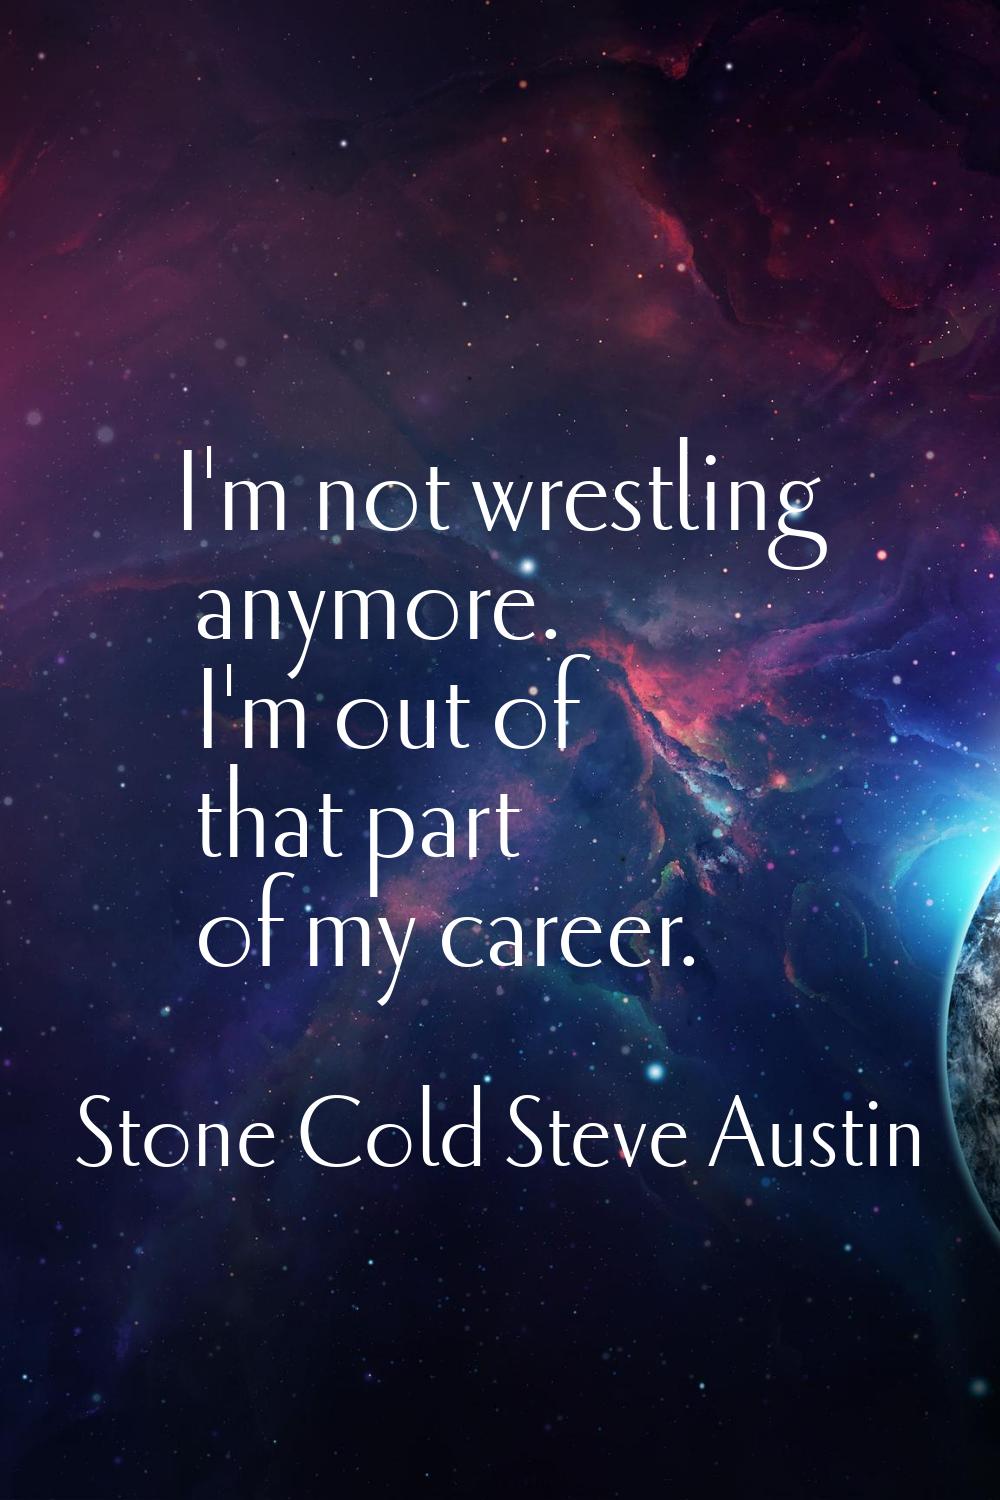 I'm not wrestling anymore. I'm out of that part of my career.